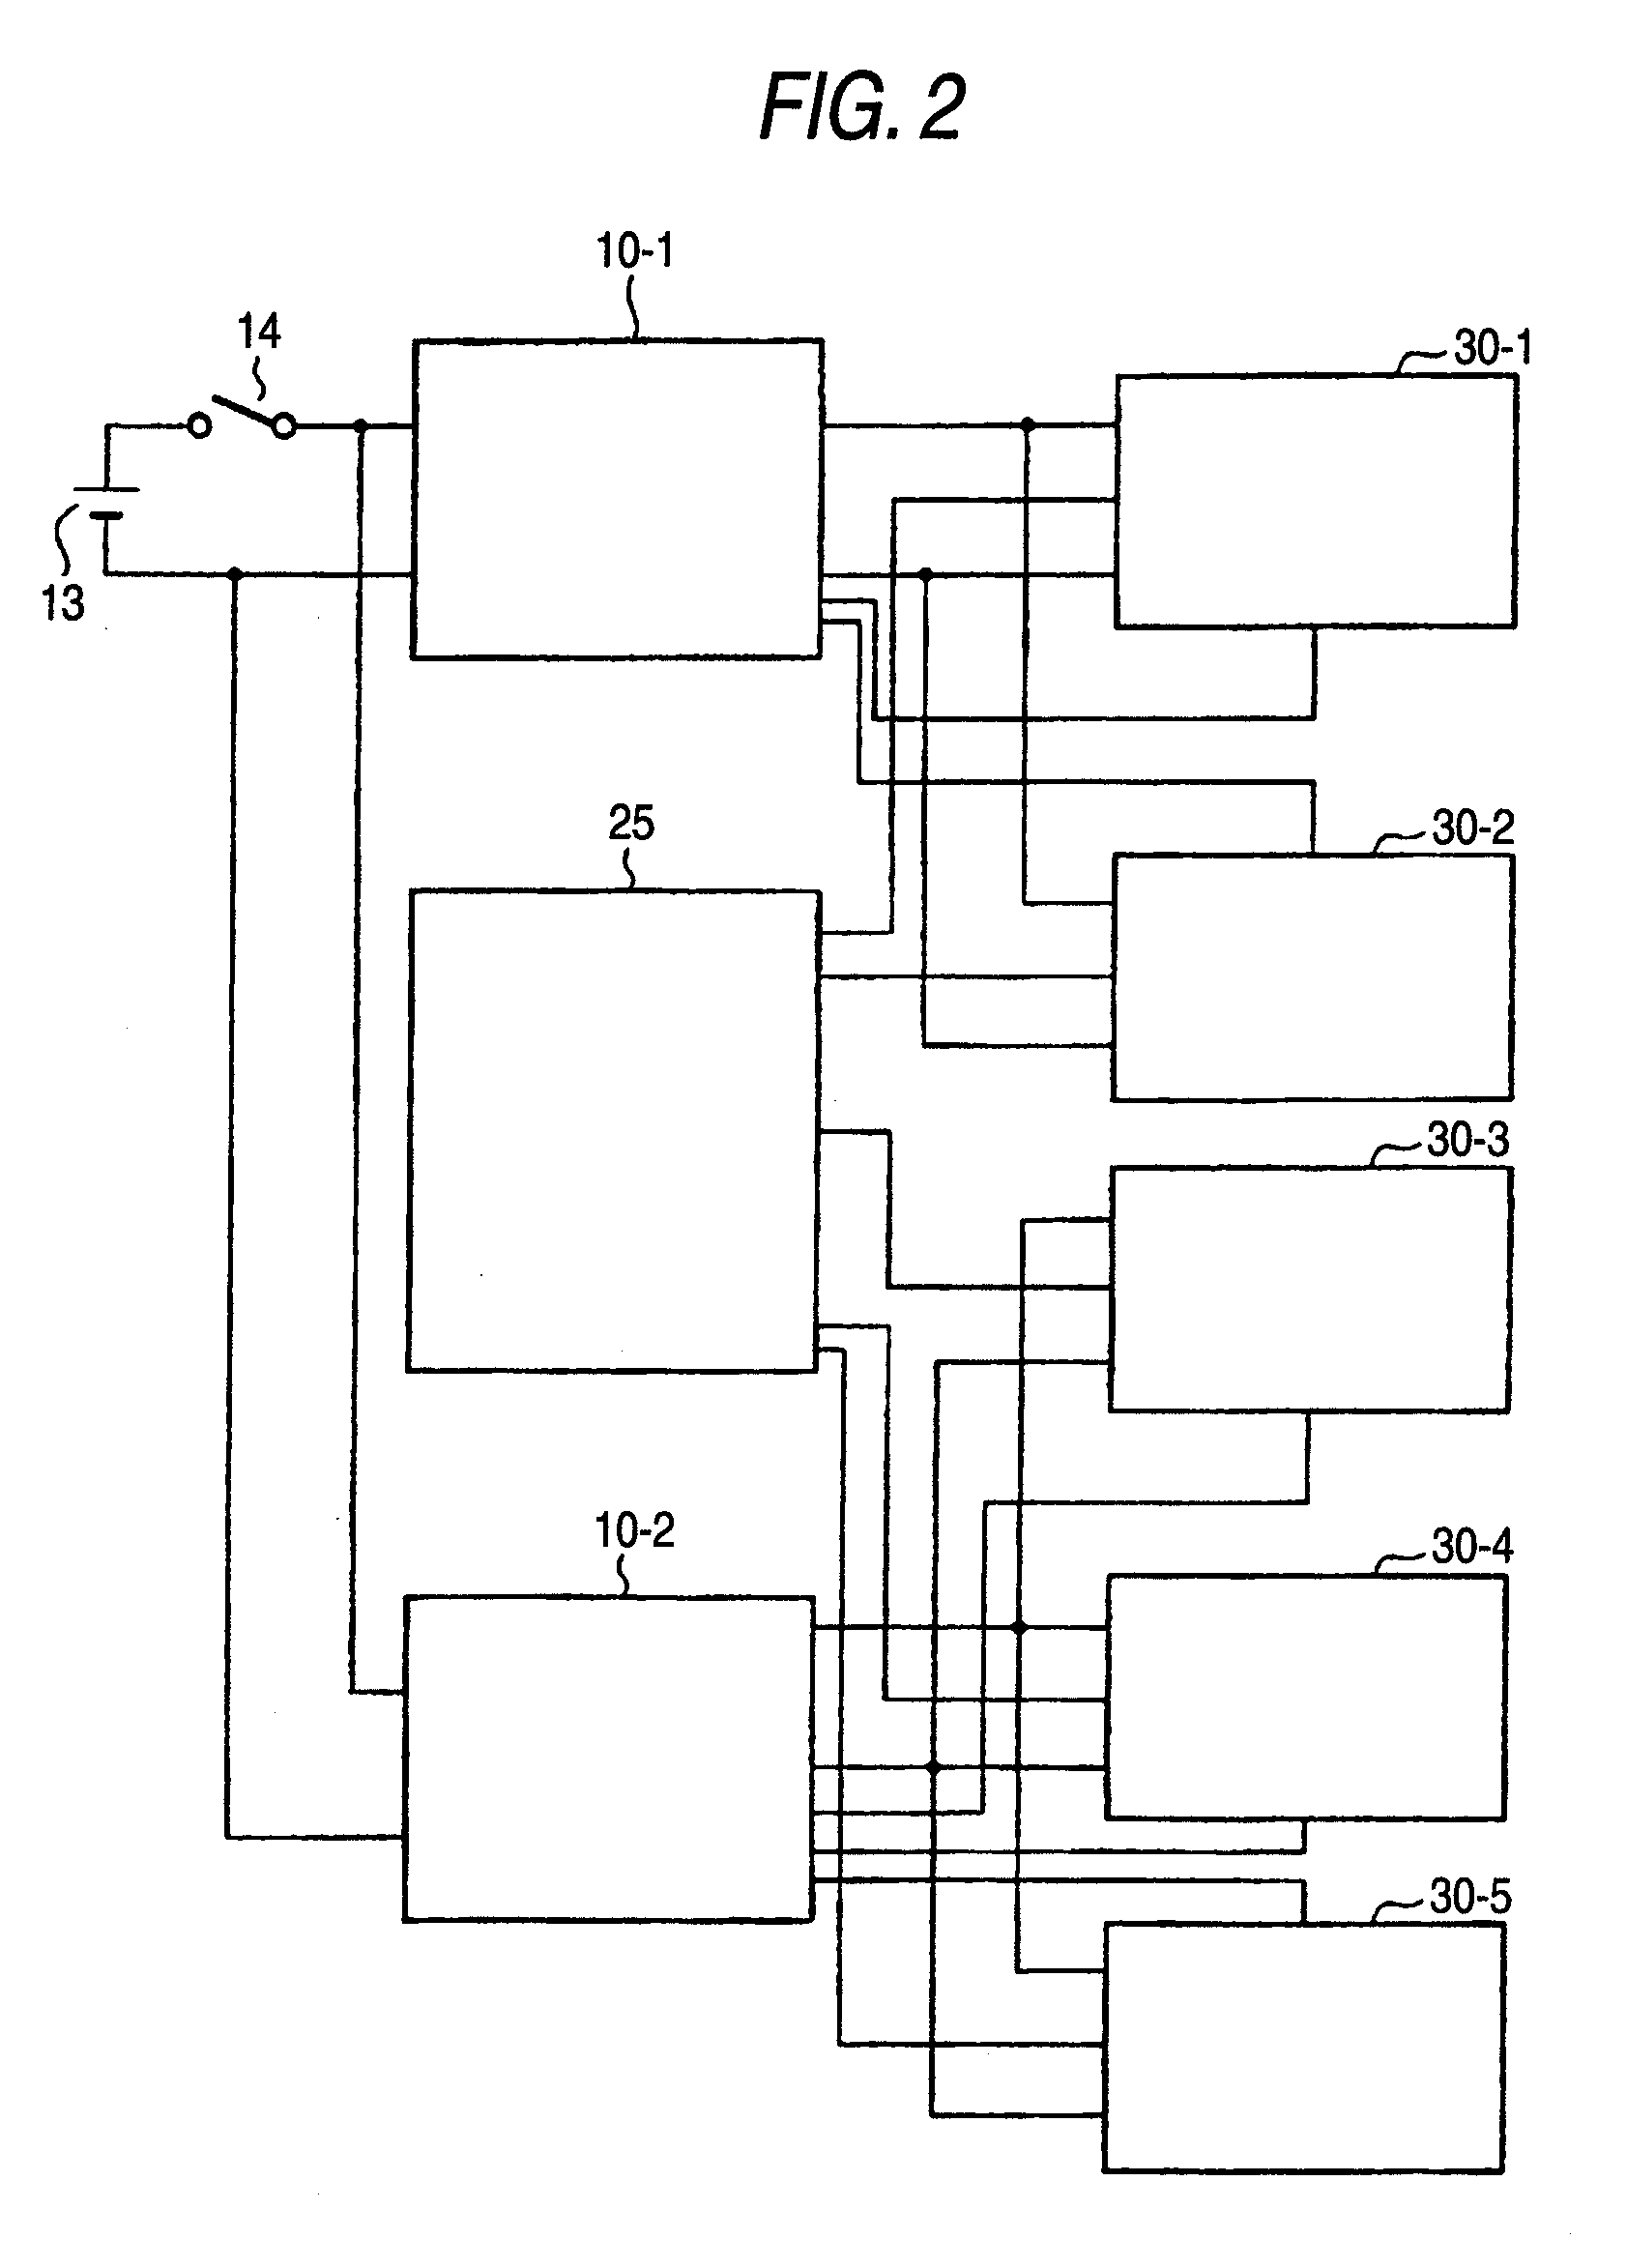 Lighting controller of lighting device for vehicle